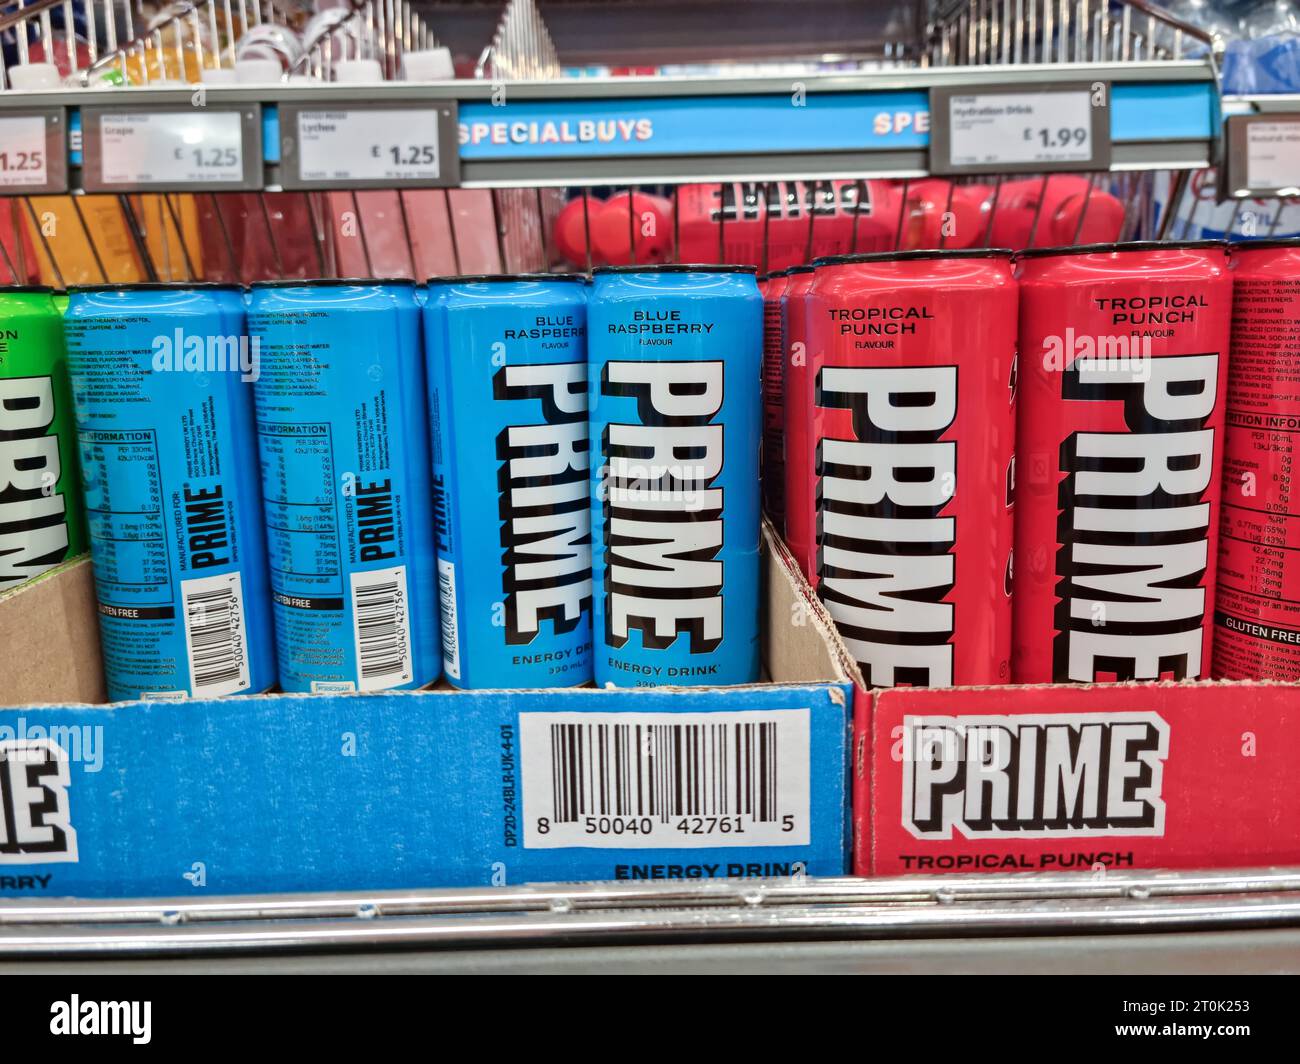 Exeter, UK - 07 October 2023: Prime energy drink for sale at Aldi Stock Photo